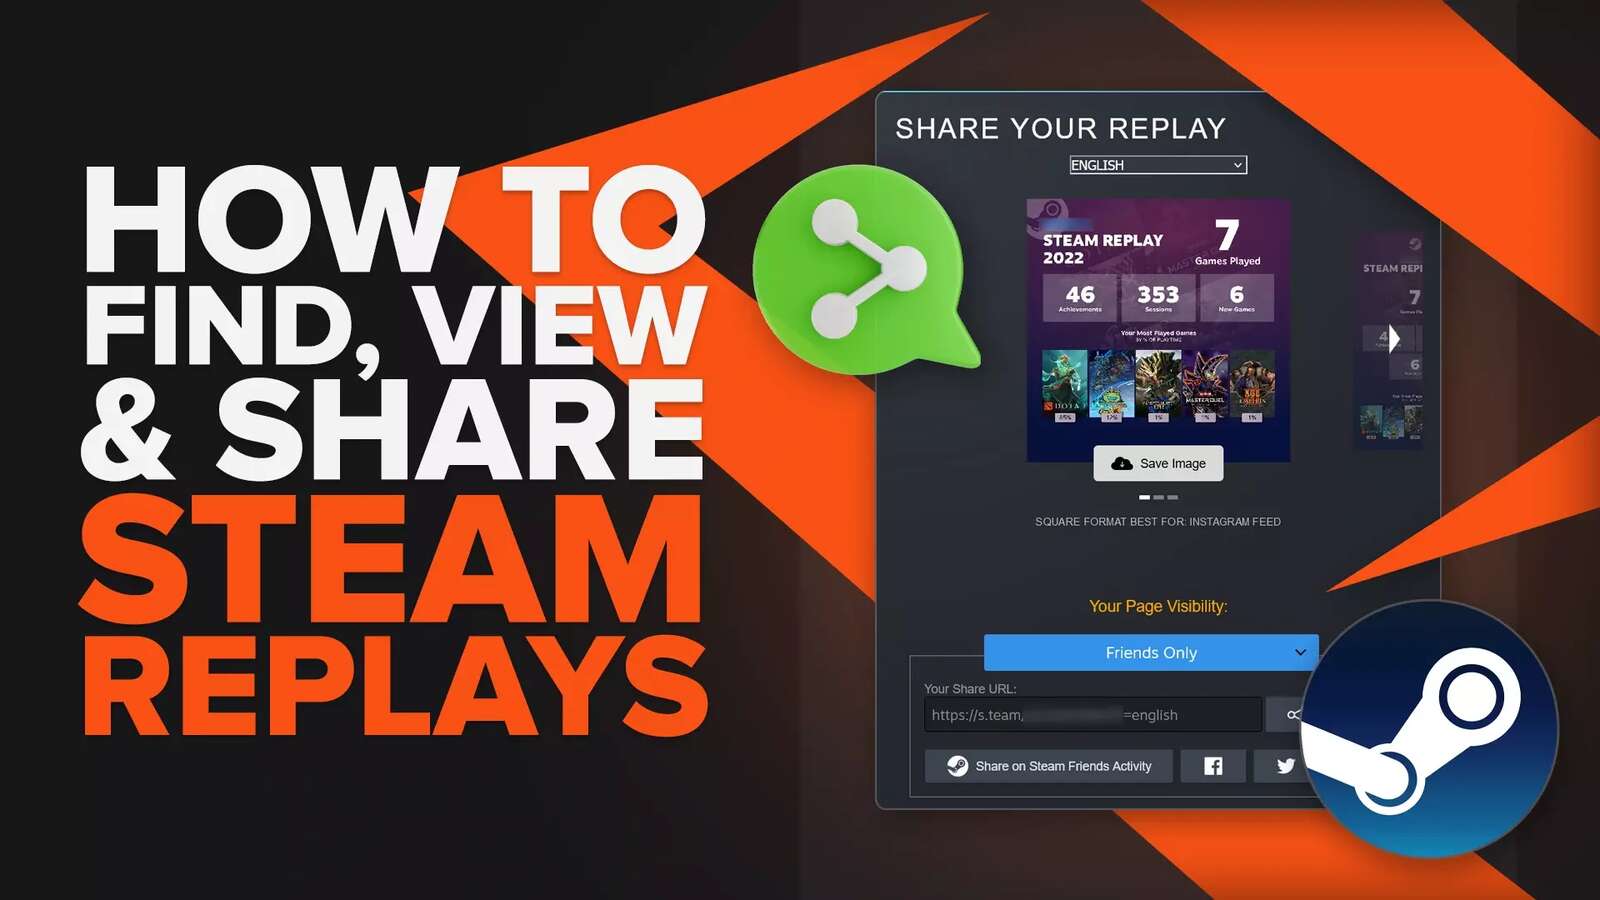 How to Quickly Find, View, and Share Your Steam Replays